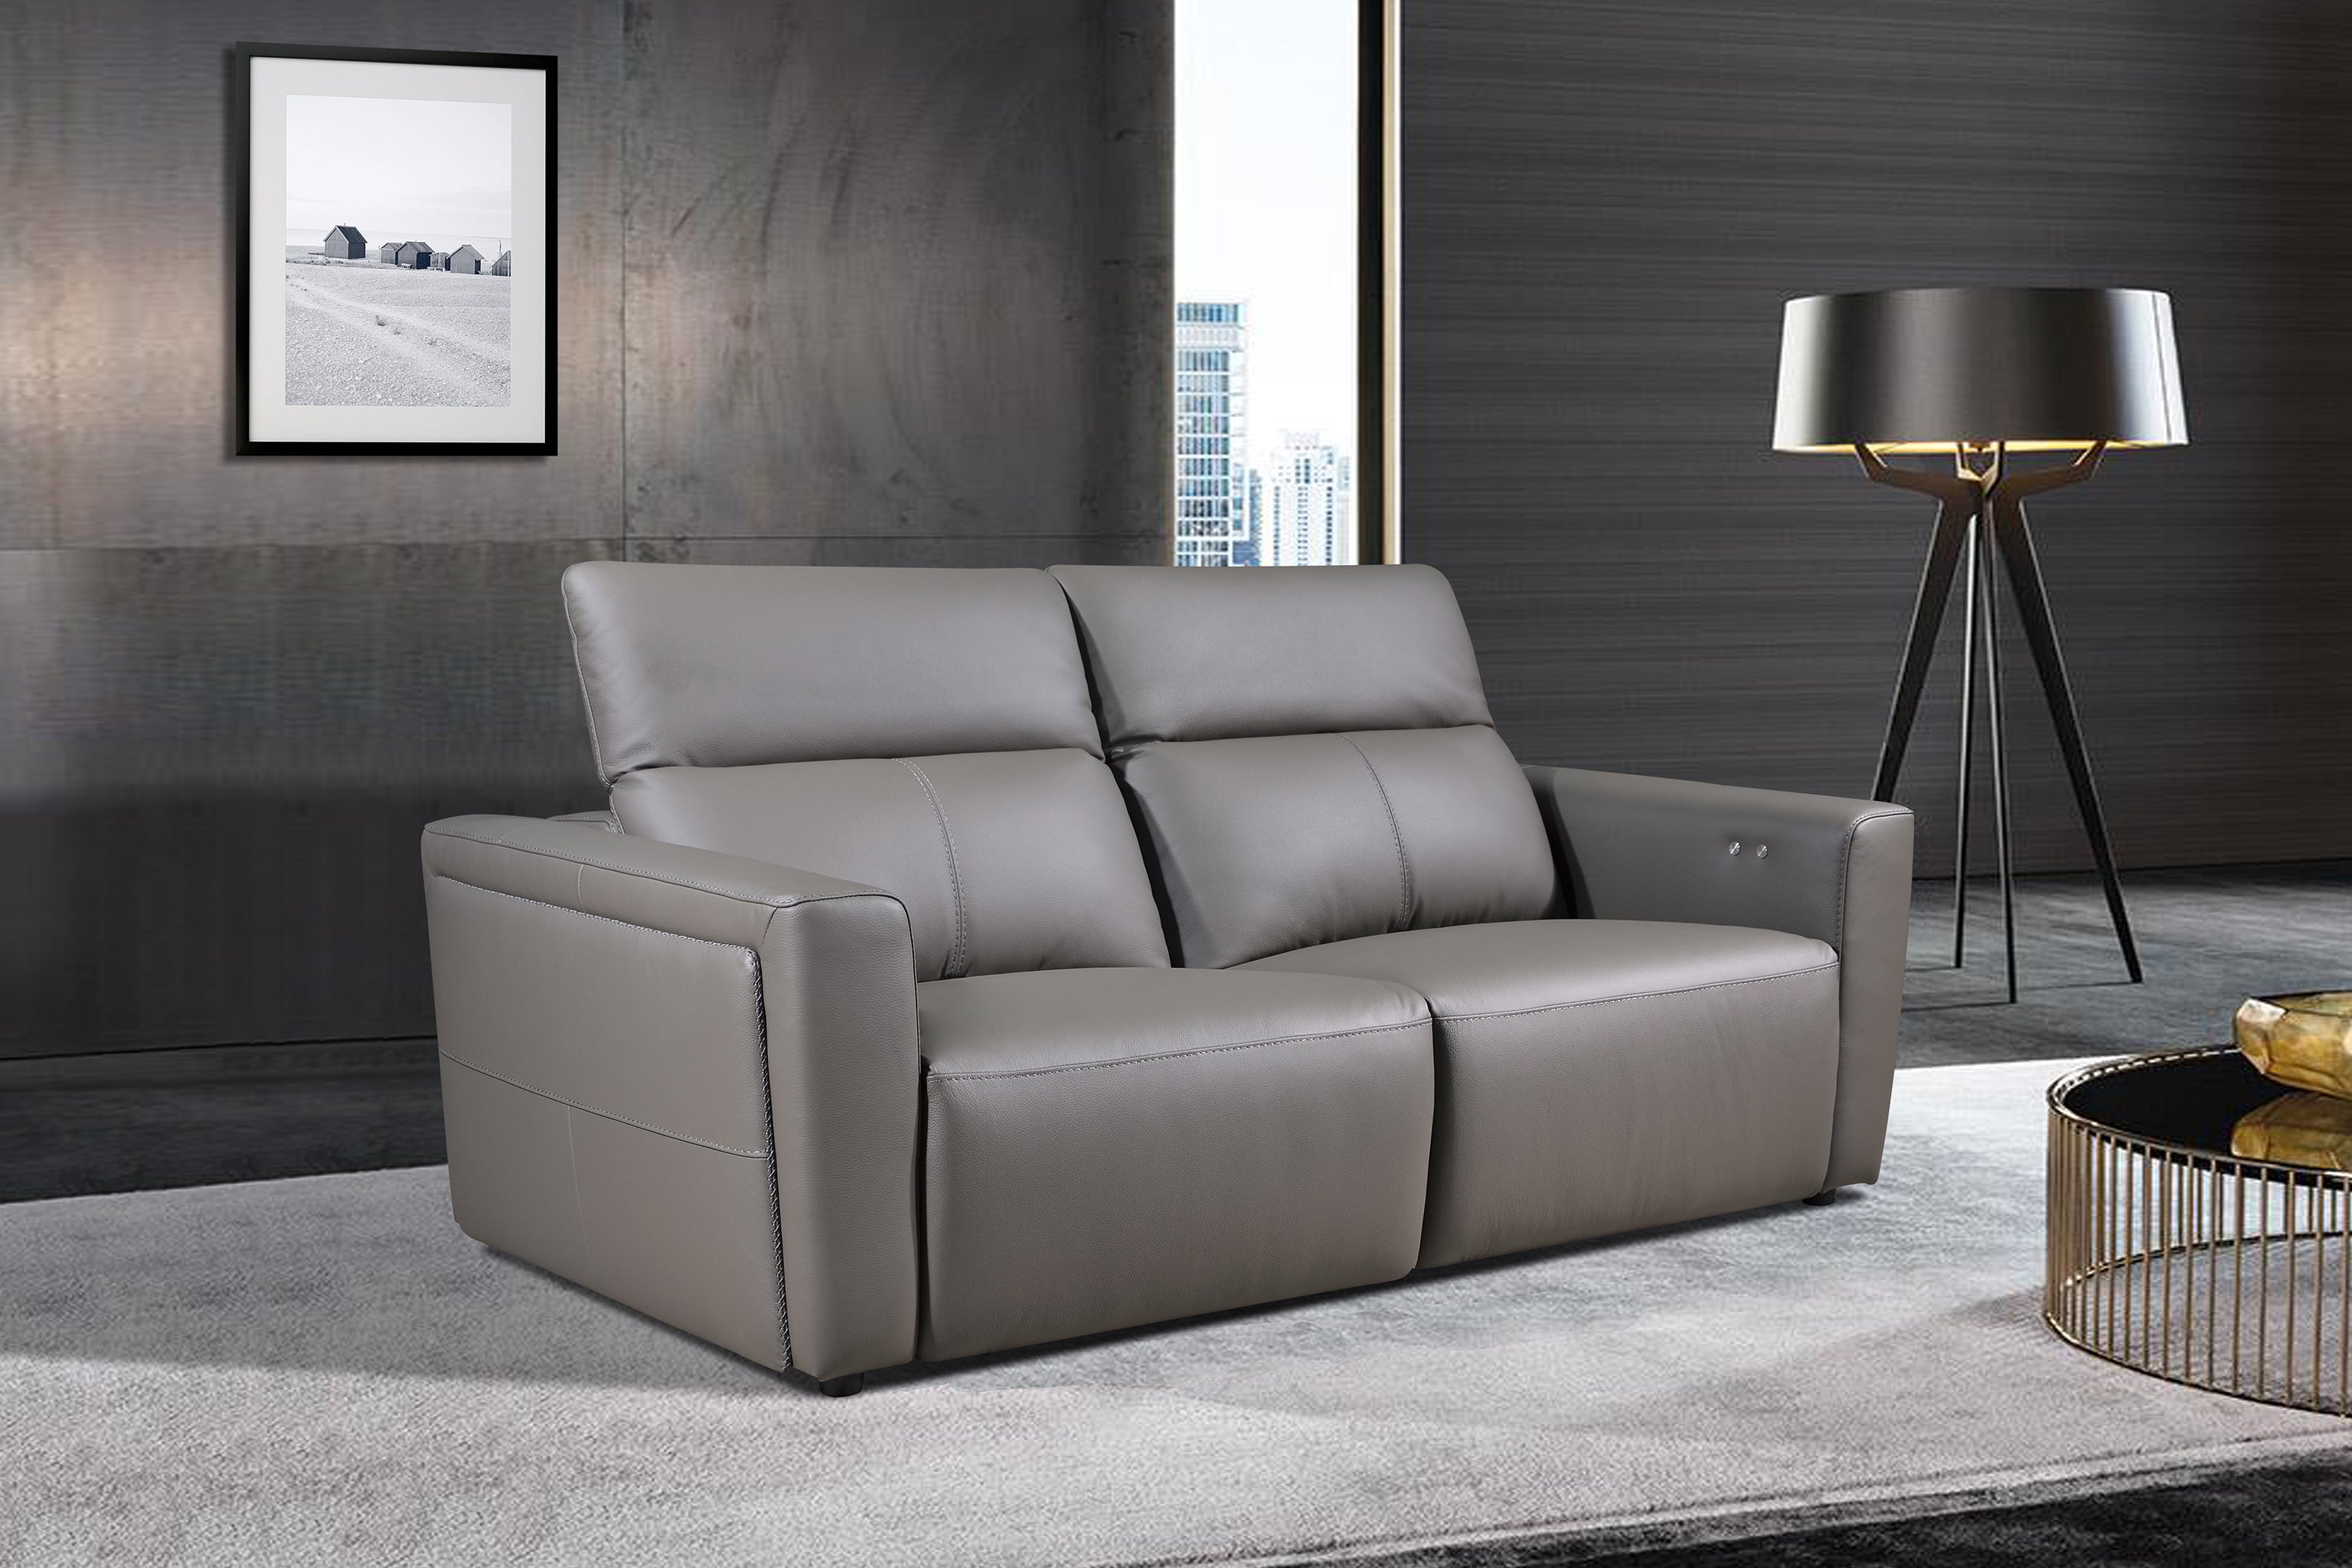 VINCI 2.5 Seater Recliner Sofa in Leather by Castilla